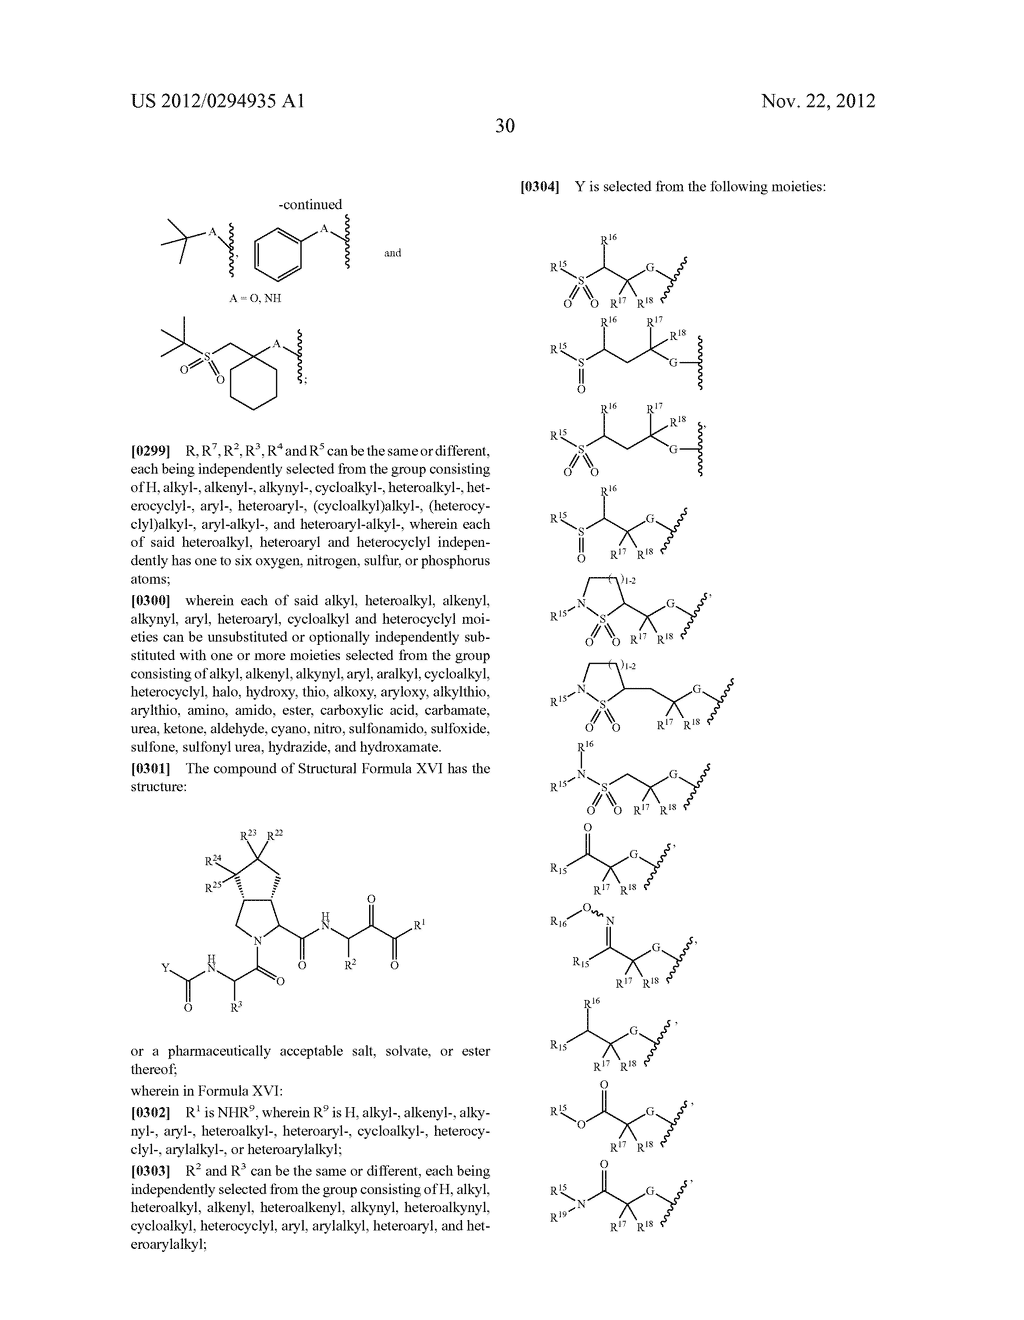 PROCESS FOR THE PRECIPITATION AND ISOLATION OF 6,6-DIMETHYL-3-AZA-BICYCLO     [3.1.0] HEXANE-AMIDE COMPOUNDS BY CONTROLLED PRECIPITATION AND     PHARMACEUTICAL FORMULATIONS CONTAINING SAME - diagram, schematic, and image 38